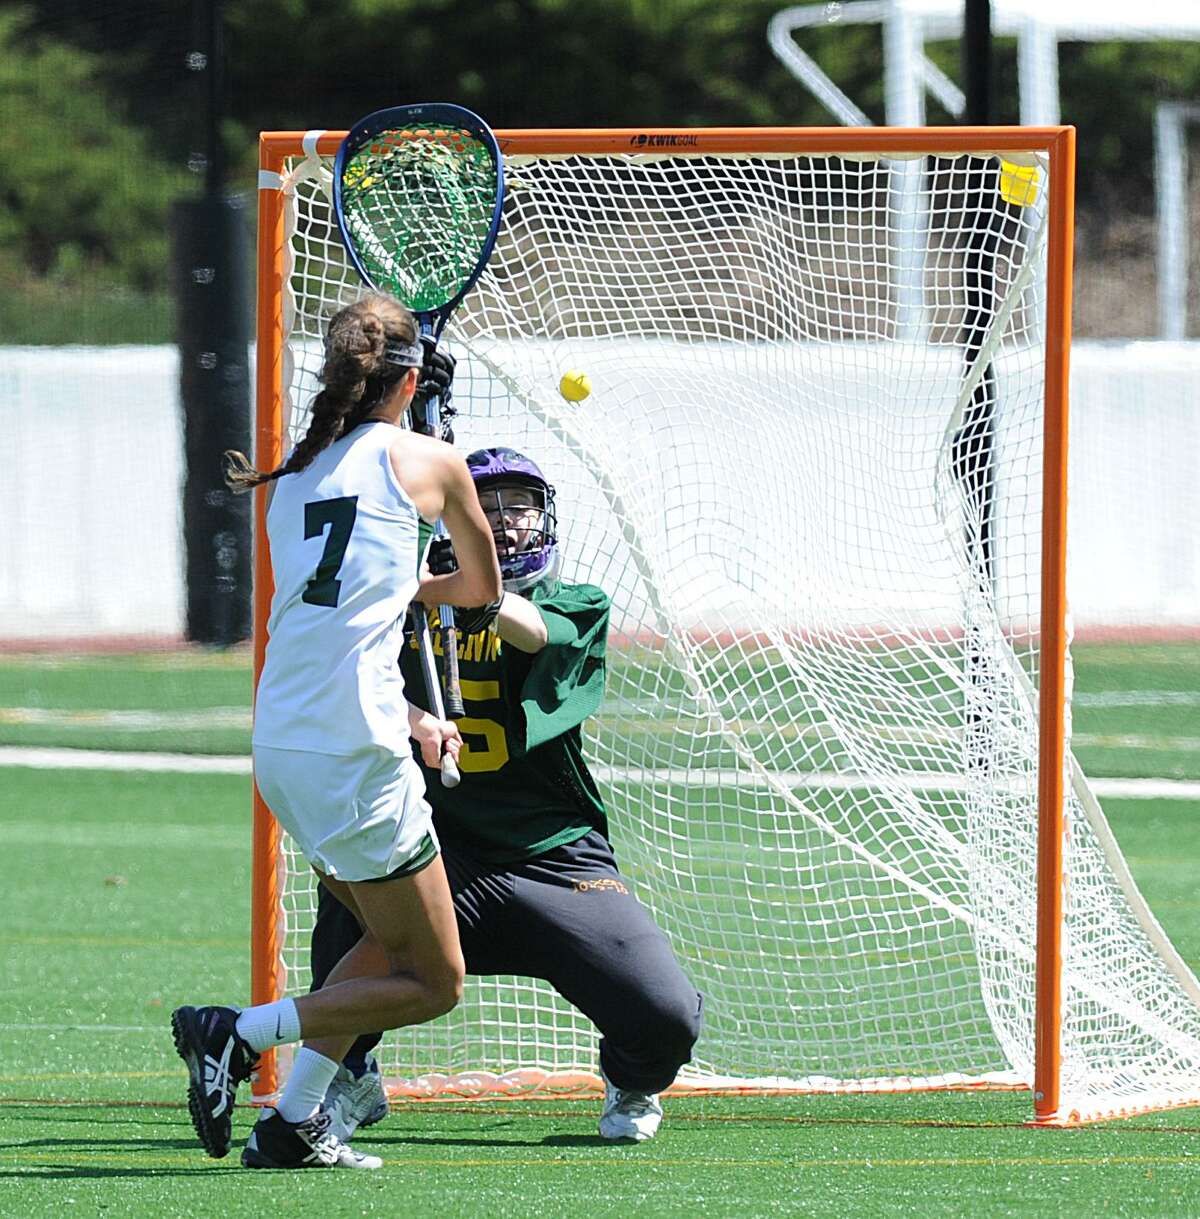 Sacred Heart’s Grace Paletta (7) scores getting a shot past Greenwich Academy goalie Maggie Reville during the second half on April 30, 2016. Paletta, Sacred Heart’s senior captain, was named to the U.S. Lacrosse Connecticut All-America Lacrosse Team. The All-America Team includes 21 public and private school players from the state.